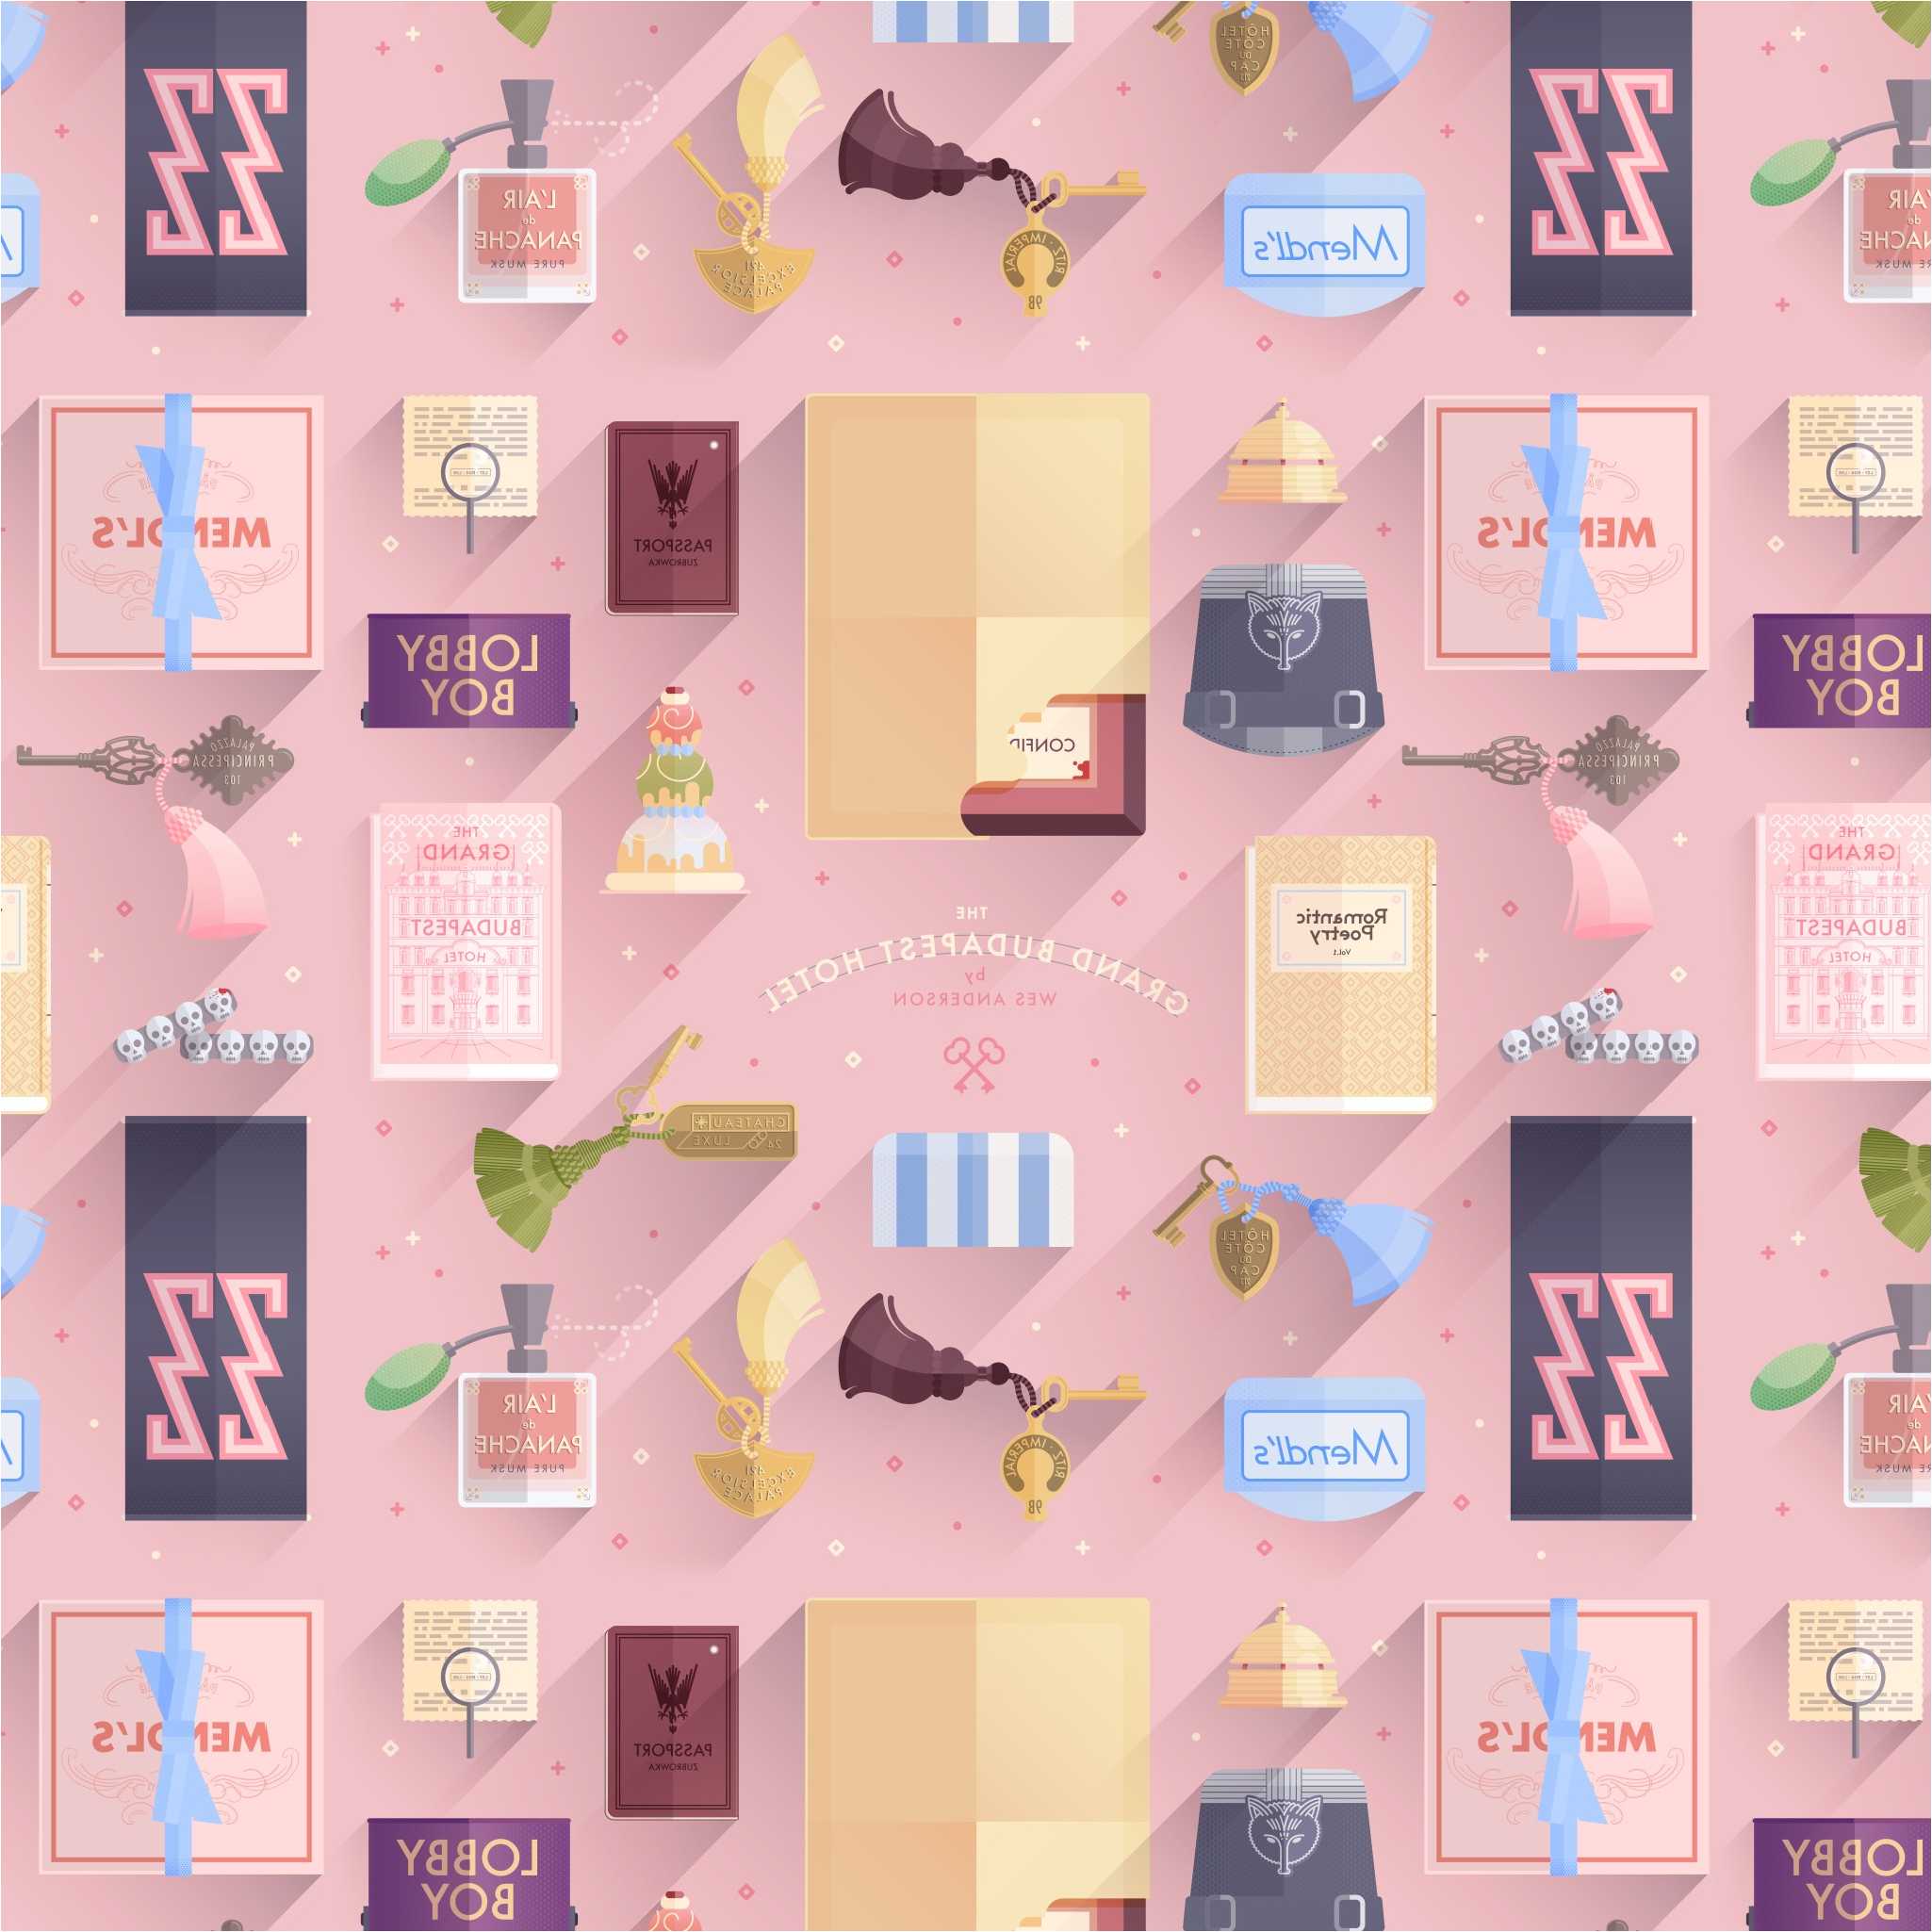 The Grand Budapest Hotel Wallpaper, Best The Grand Budapest Hotel